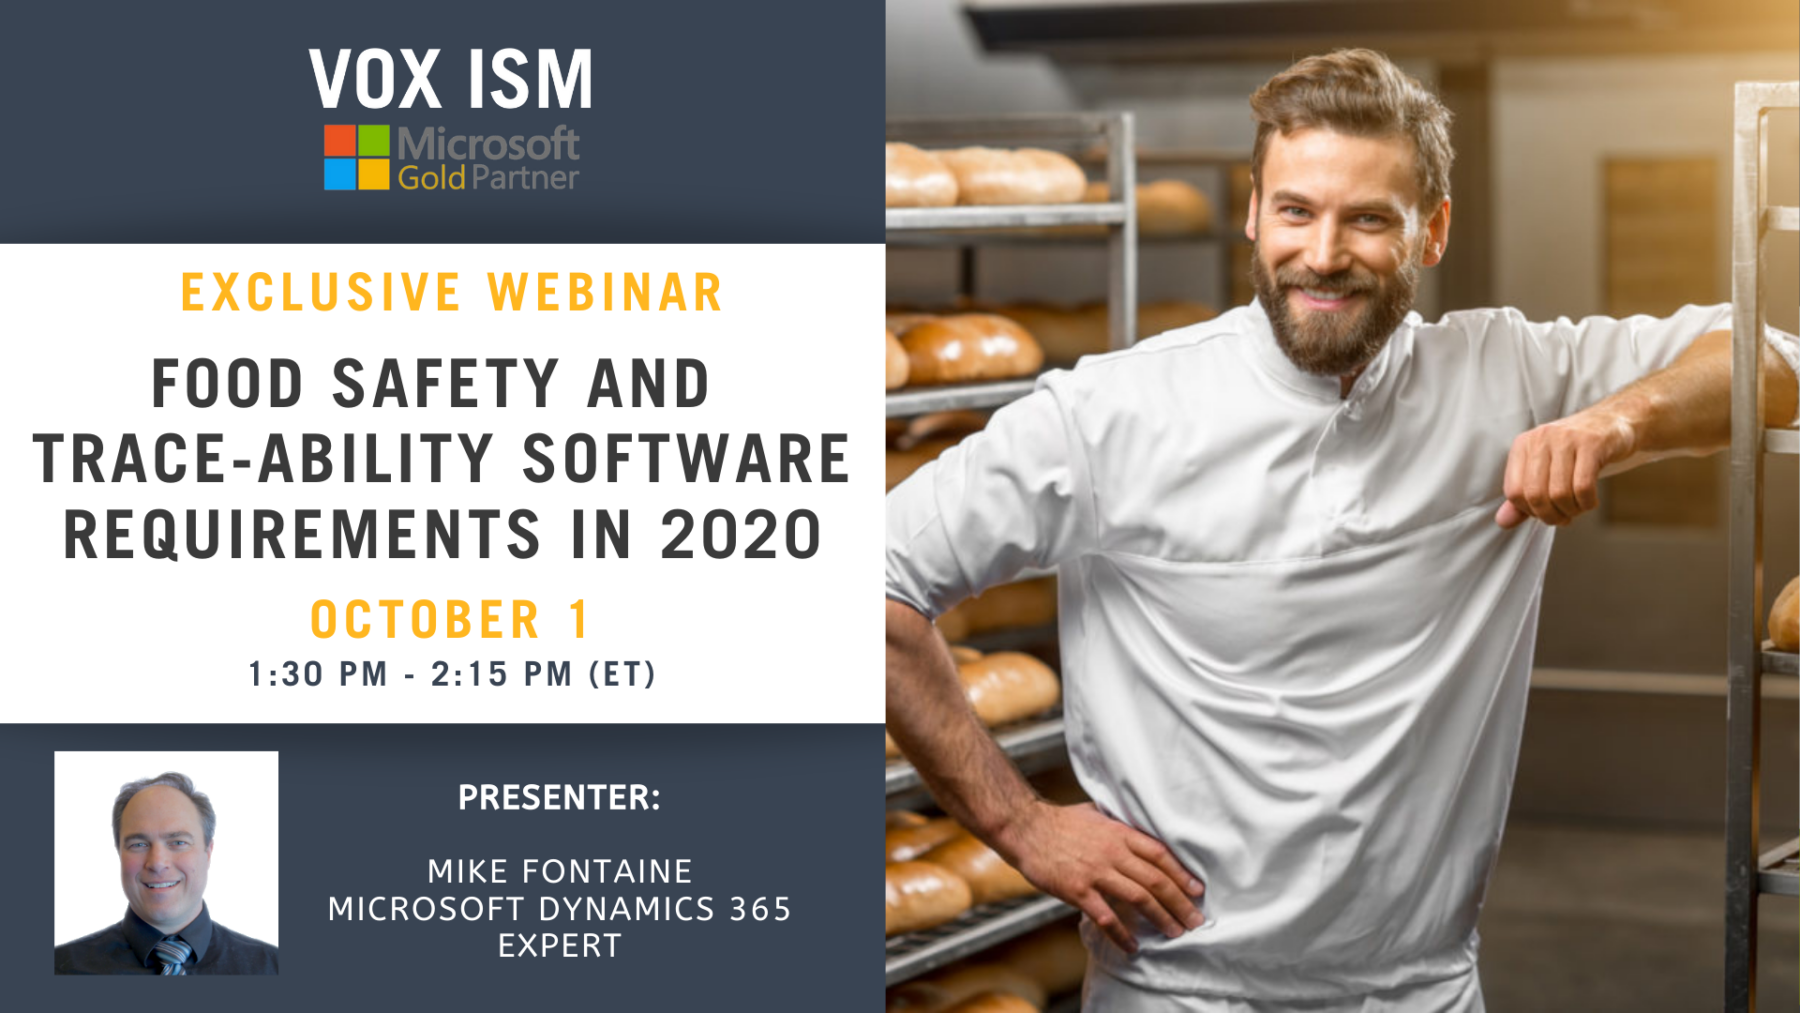 Food Safety and Trace-ability Software Requirements in the world of COVID-19 - October 1 – Webinar